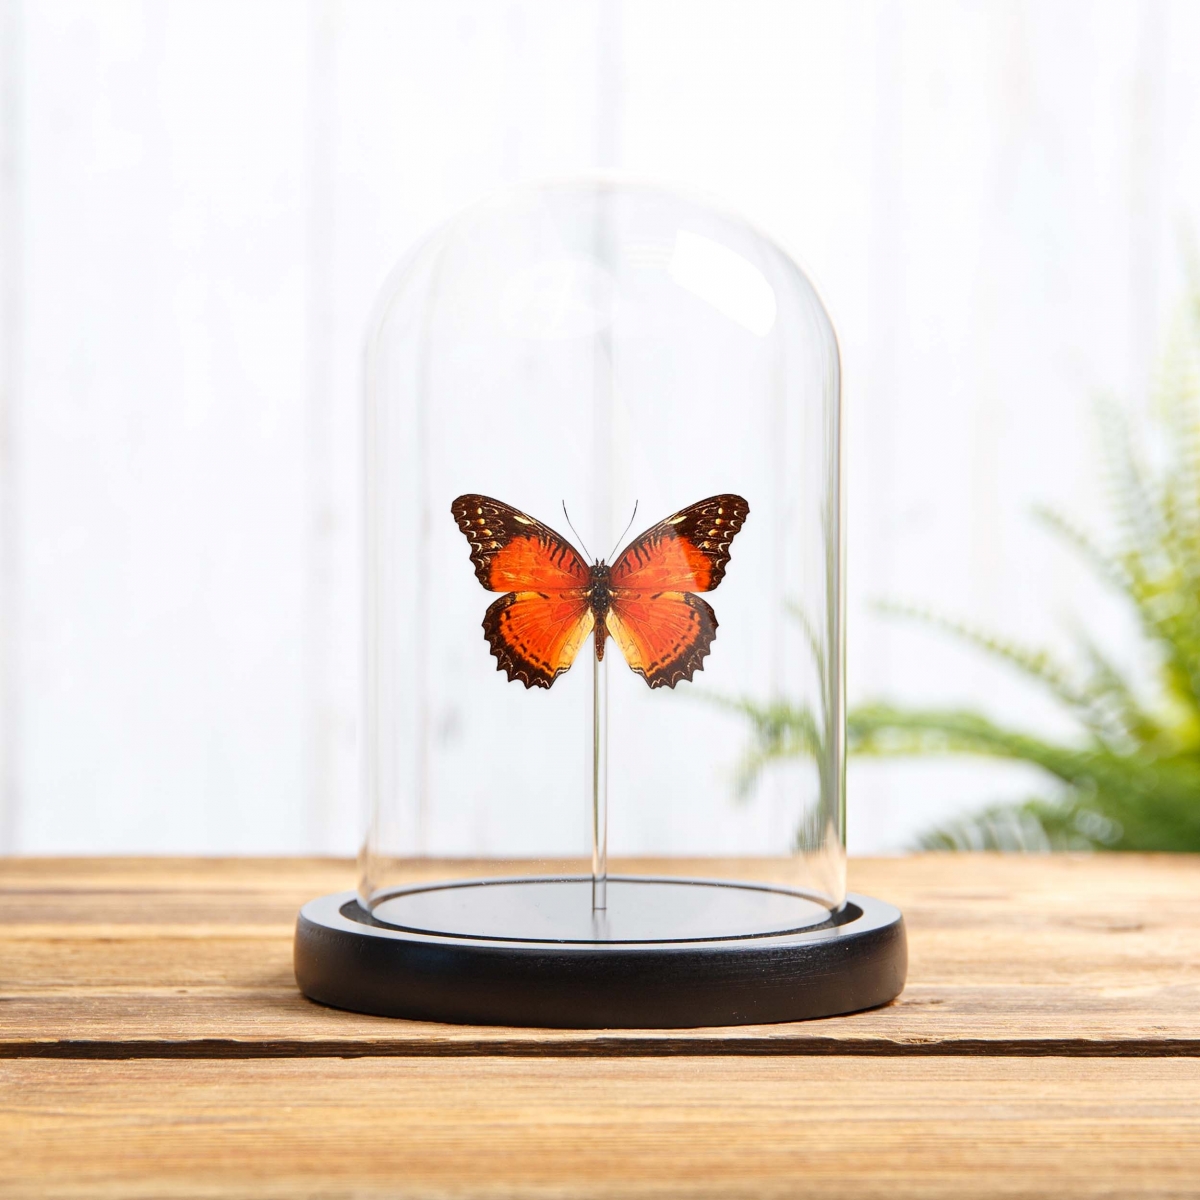 Minibeast Red Lacewing in Glass Dome with Wooden Base (Cethosia biblis)